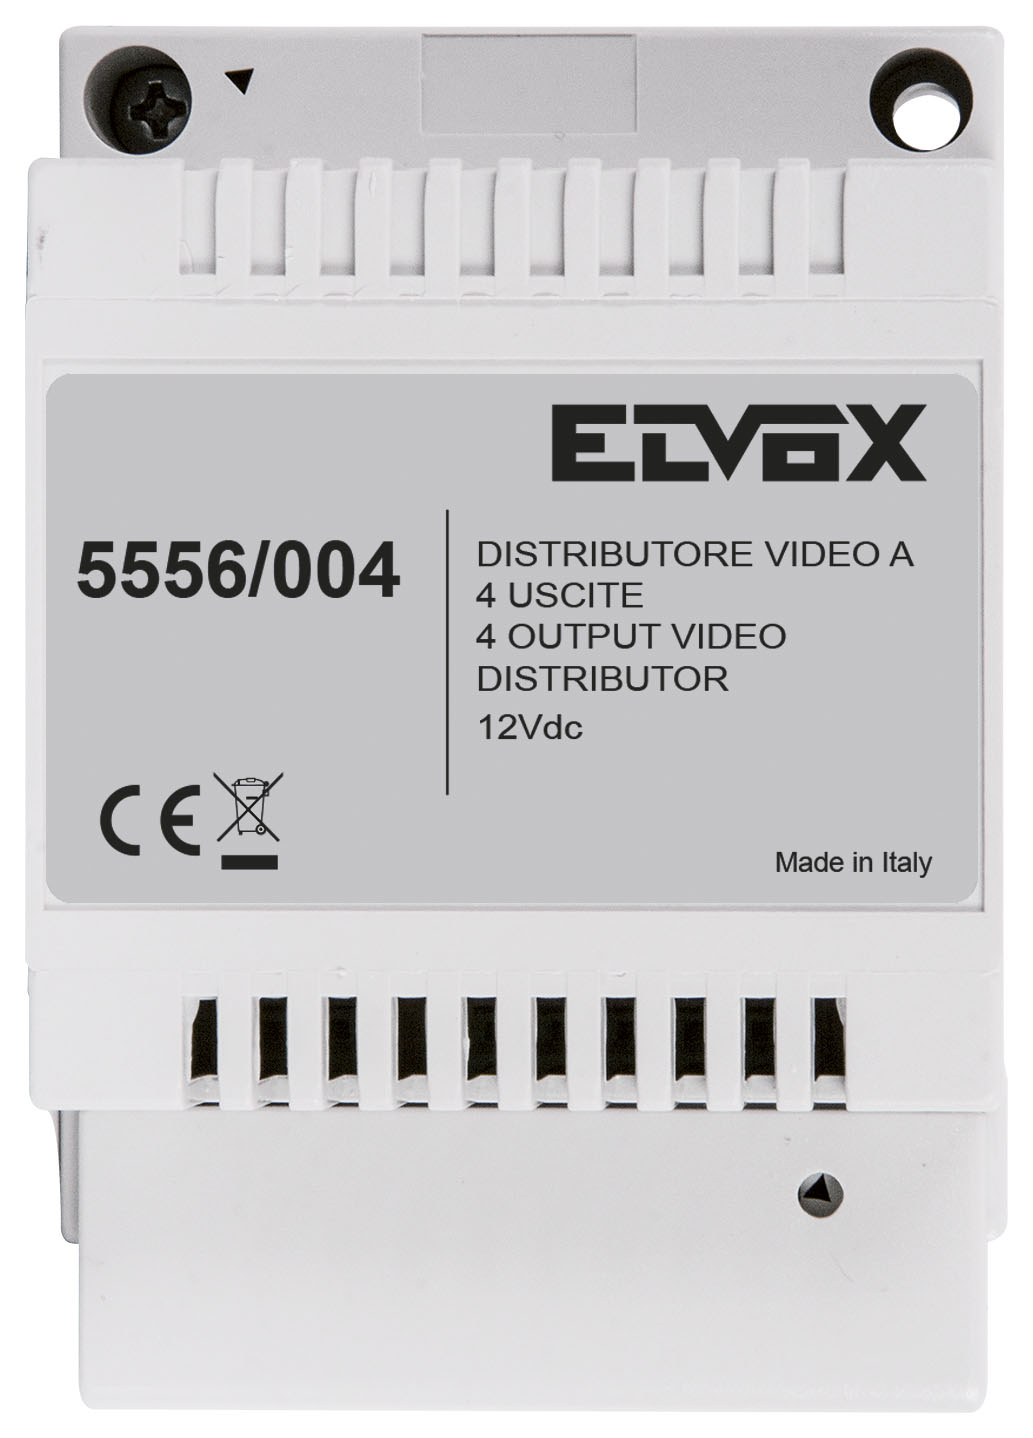 ELVOX 4-WAY VIDEO DISTRIBUTOR WHITE APARTMENT/COMMERCIAL PLASTIC 12VDC/ POWER BY BUS CONTROLLER